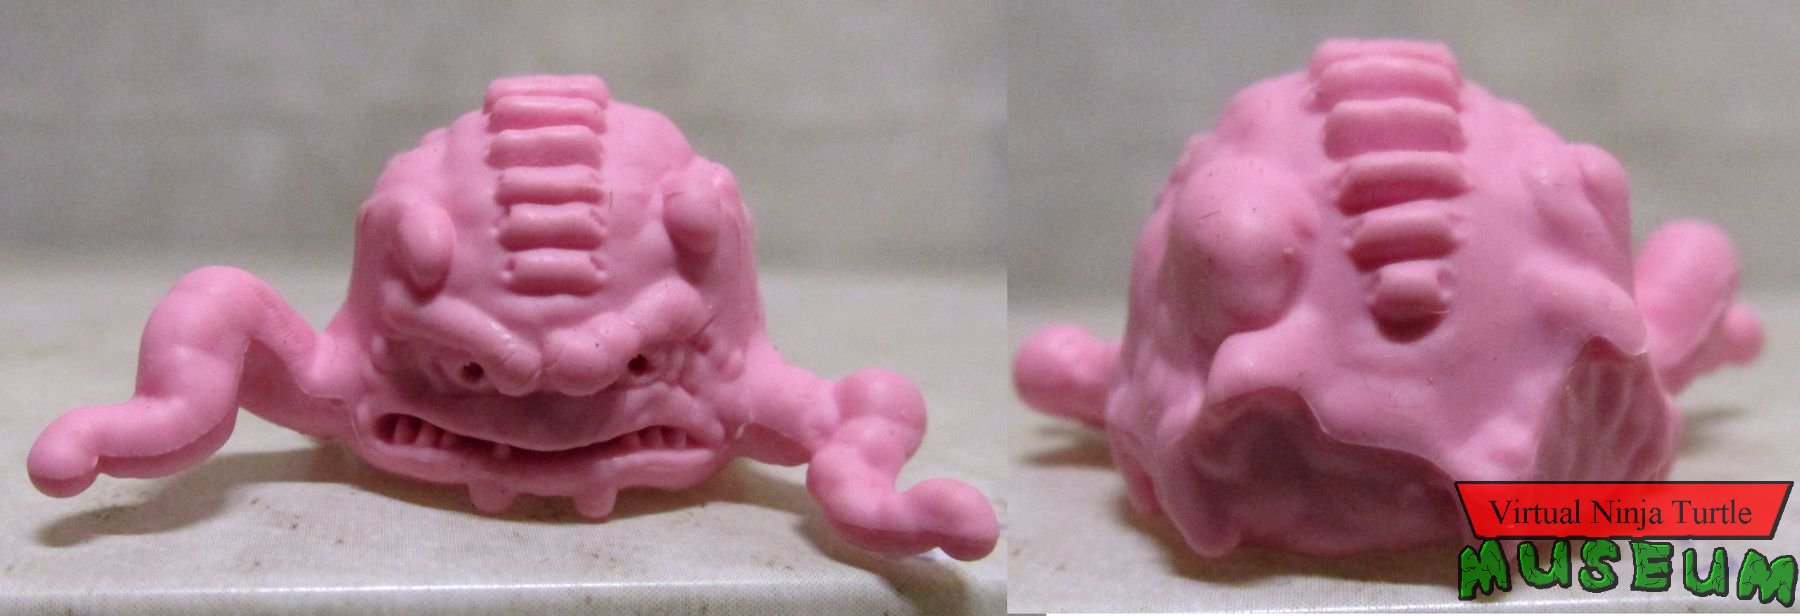 Krang front and back